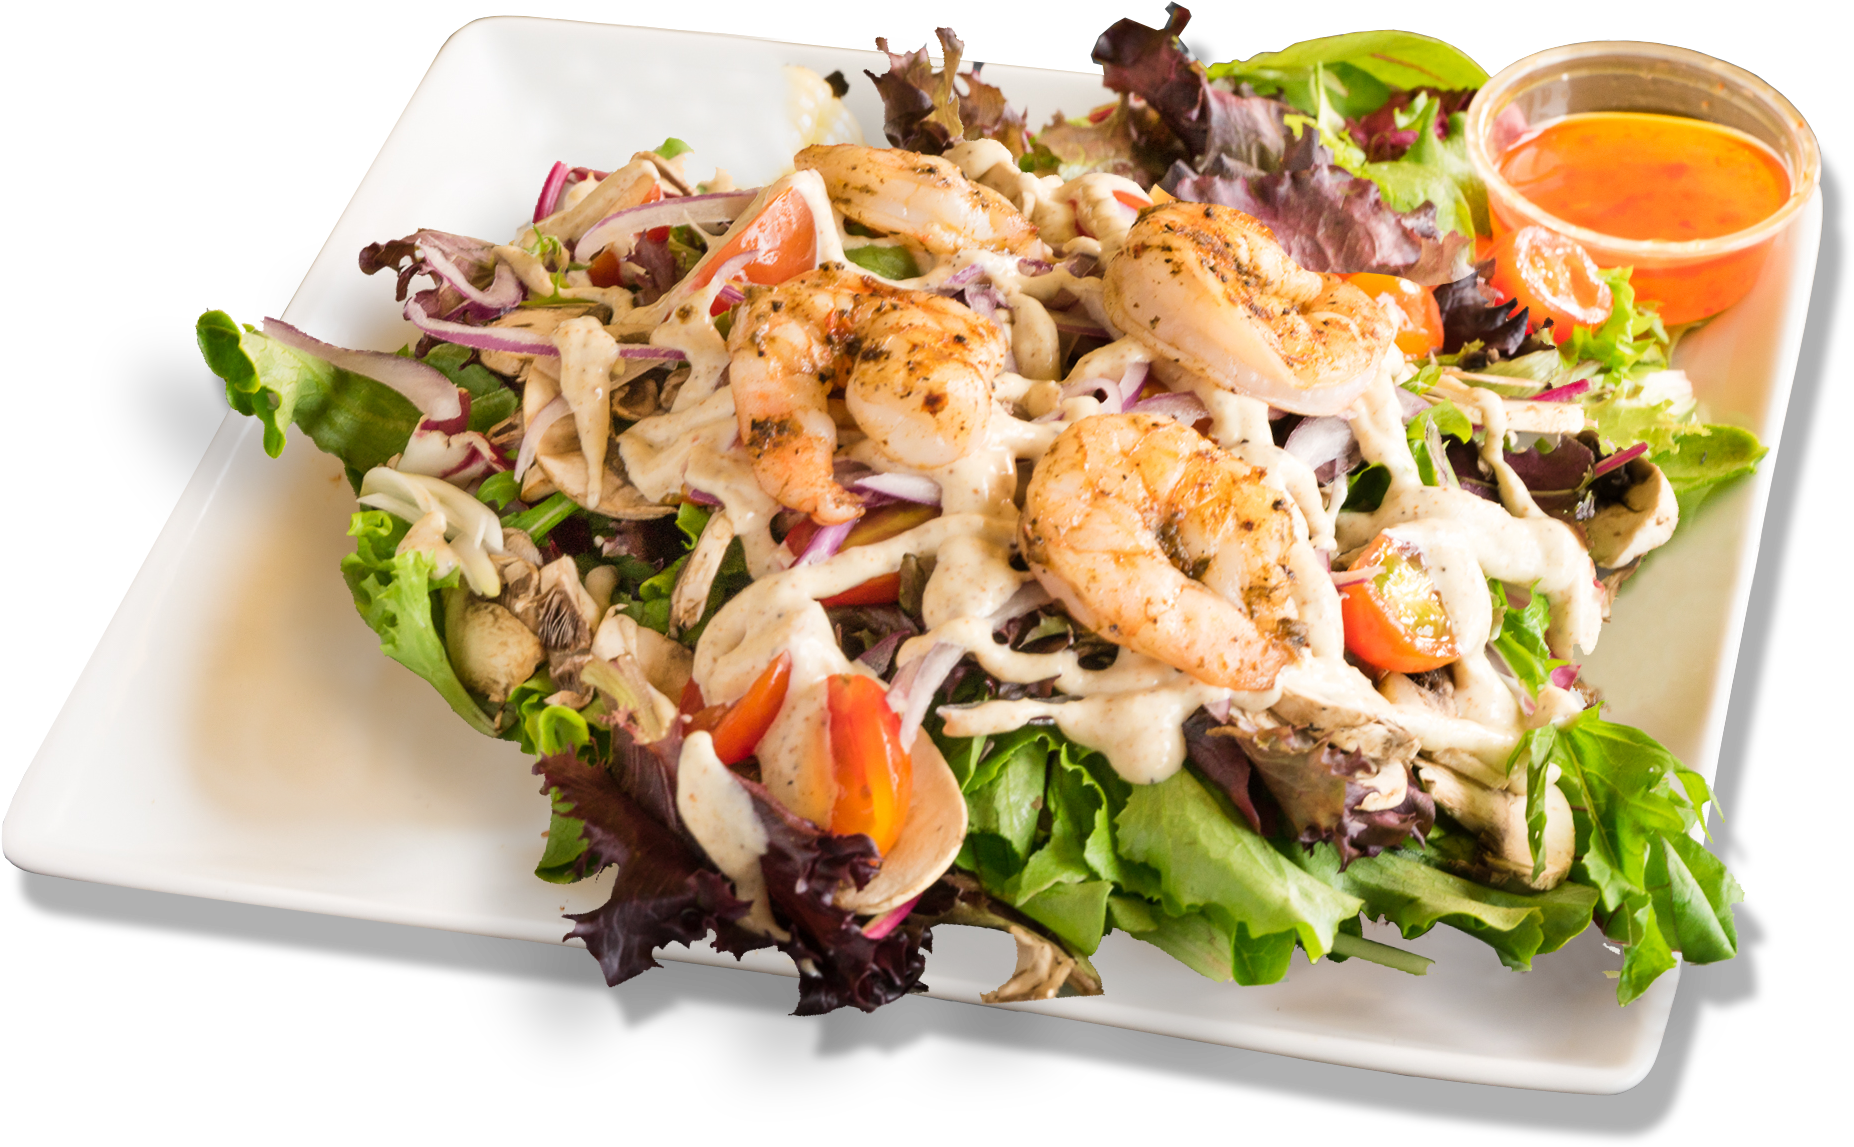 A Plate Of Salad With Shrimp And Vegetables